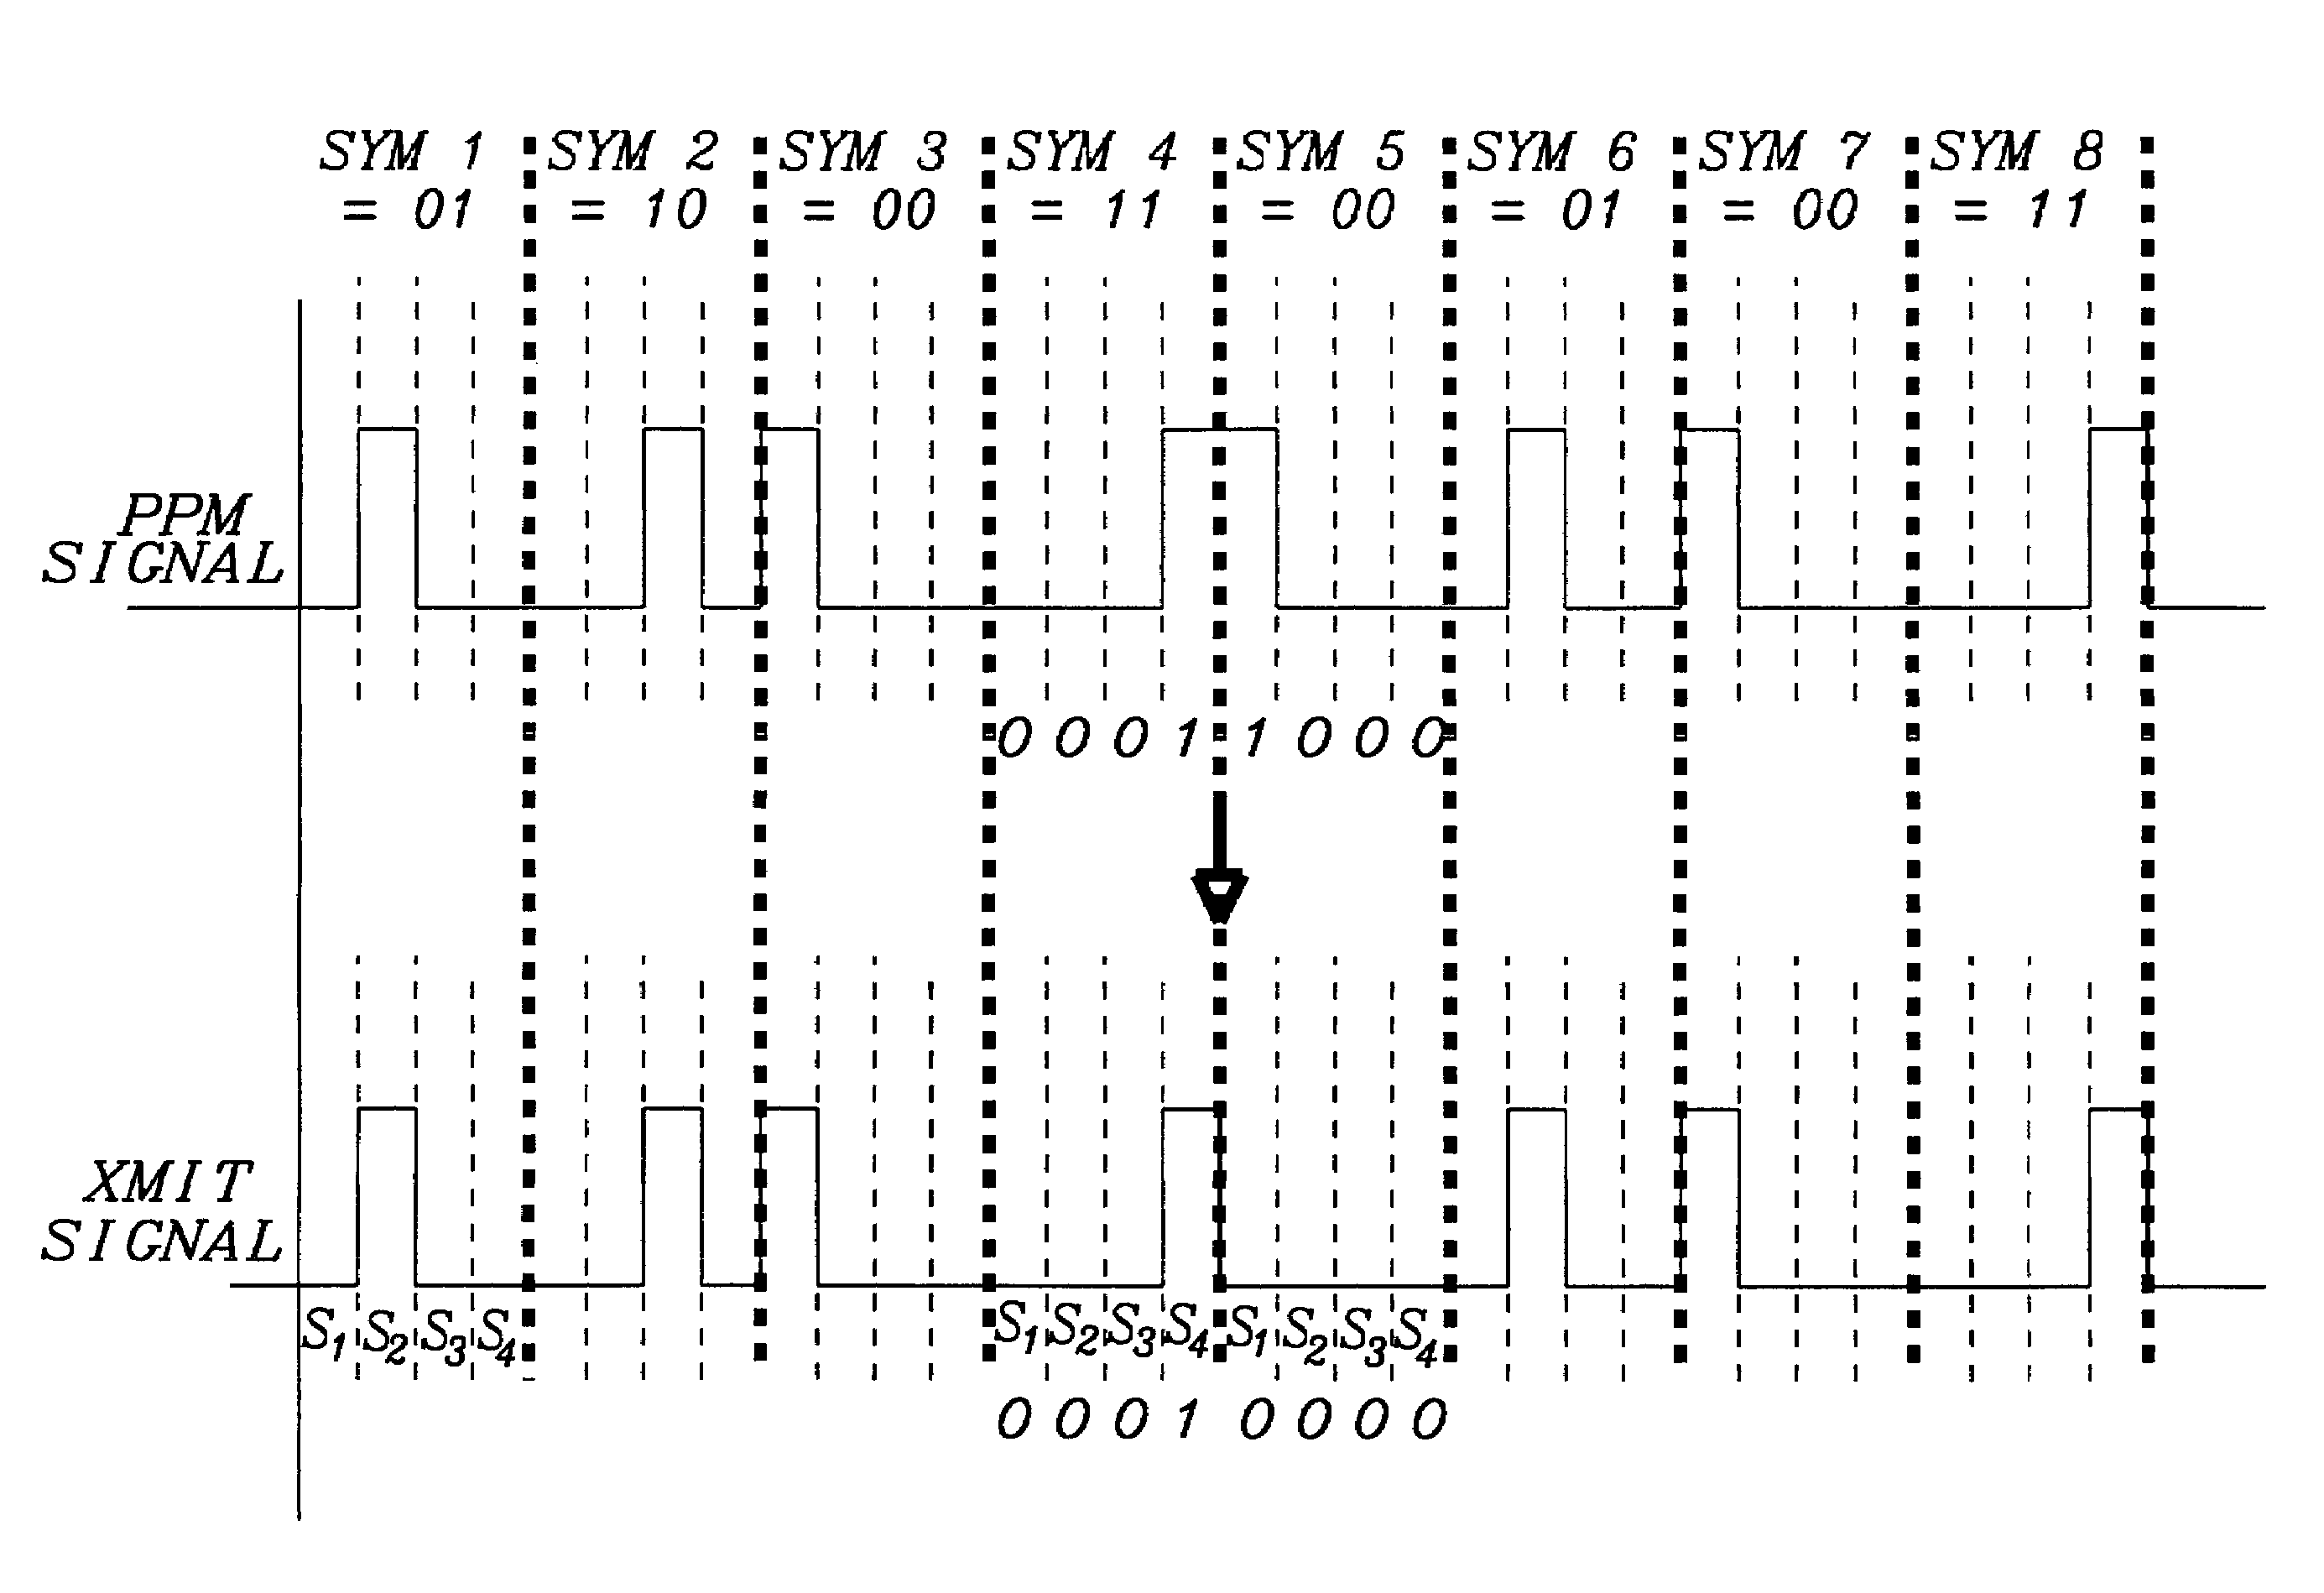 Digital modulation and demodulation technique for reliable wireless (both RF and IR) and wired high bandwidth data transmission